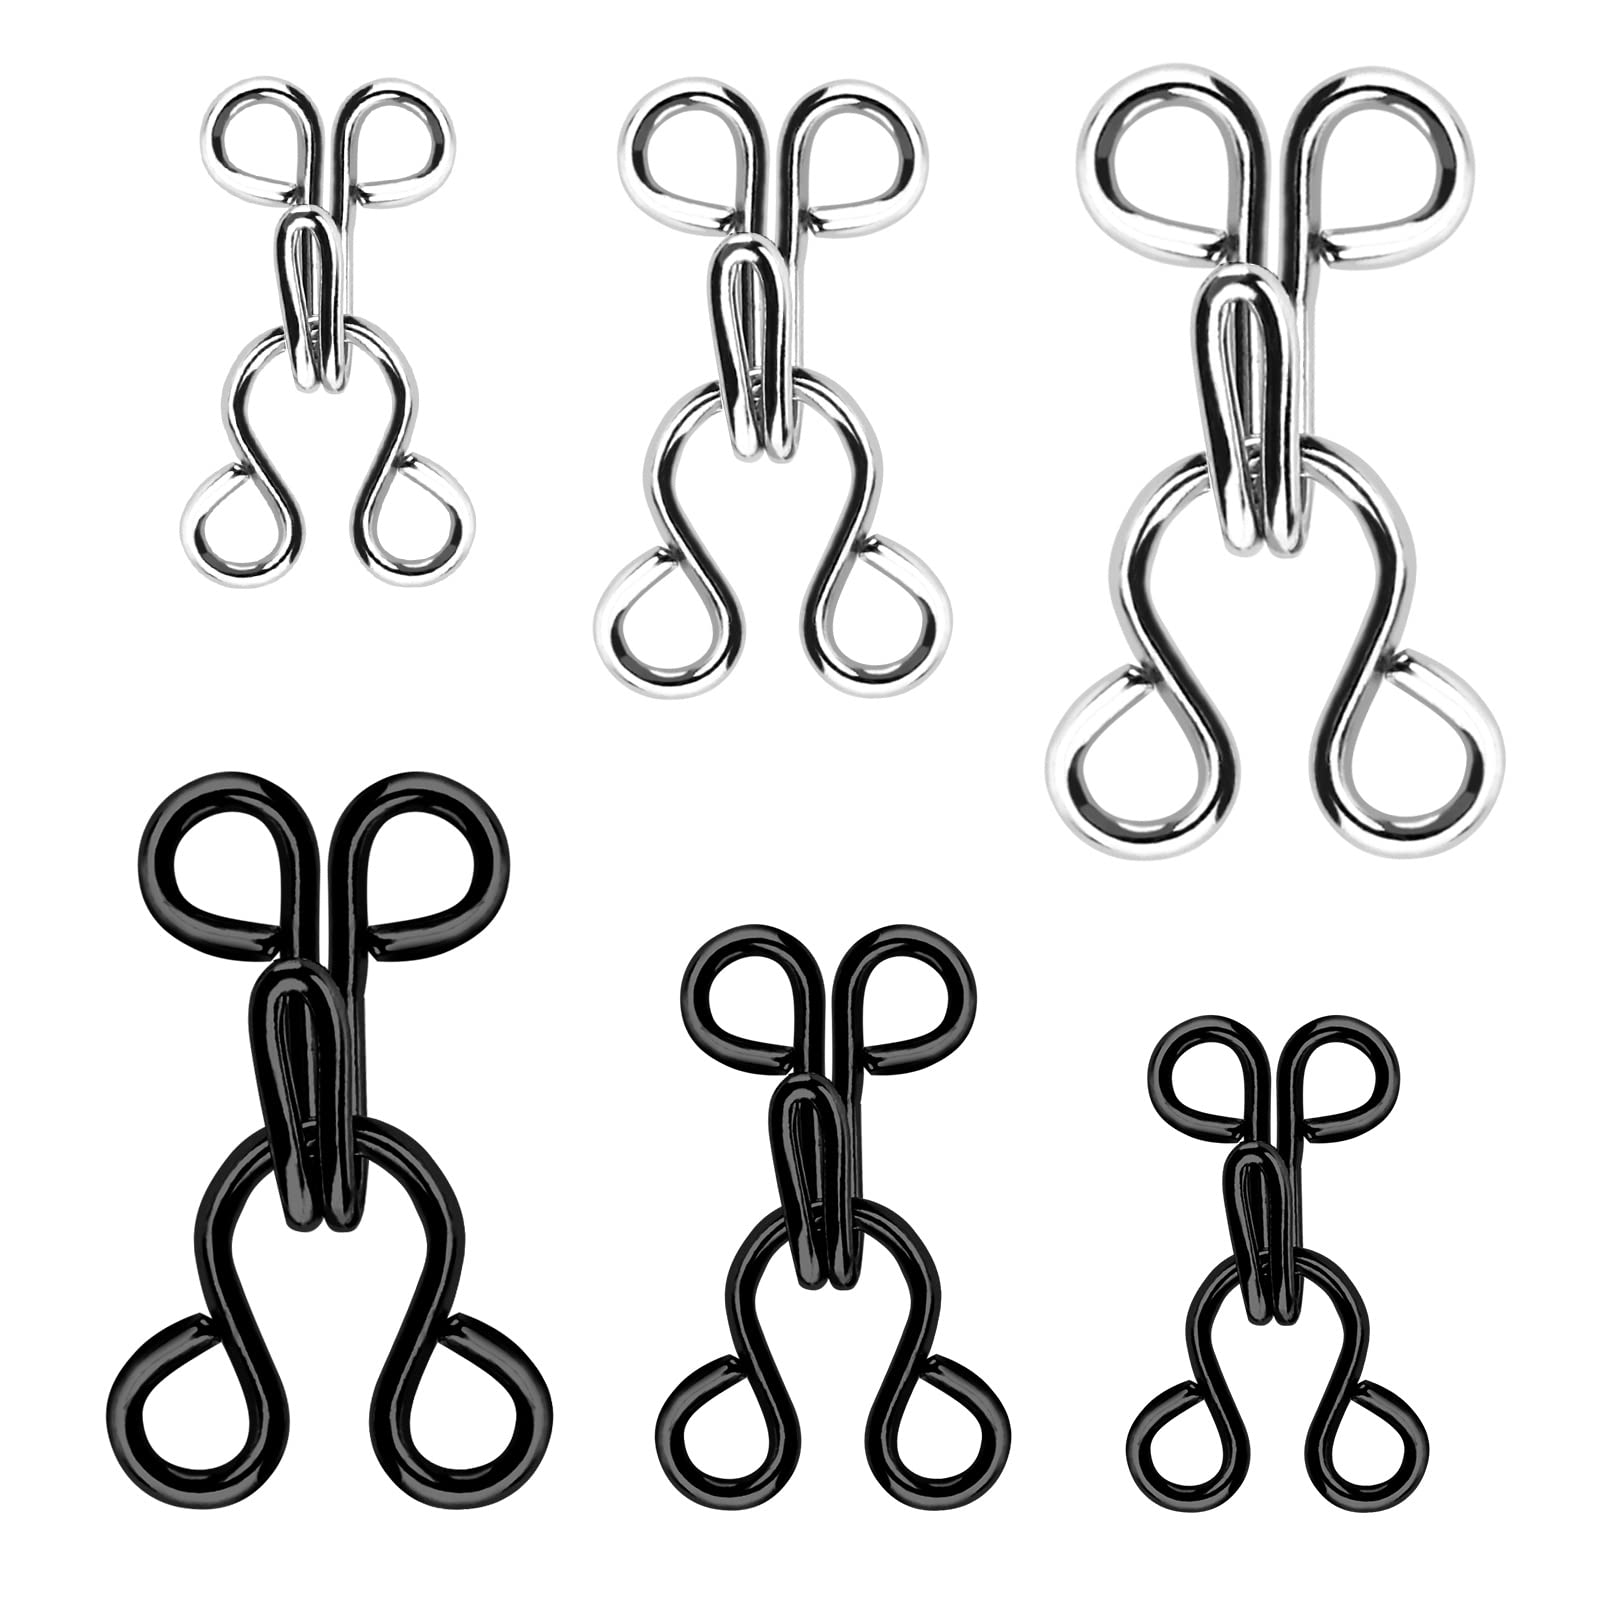 KACOLA 60 Set Sewing Hook and Eye Latch for Clothing, Bra Hooks  Replacement, Large Hooks and